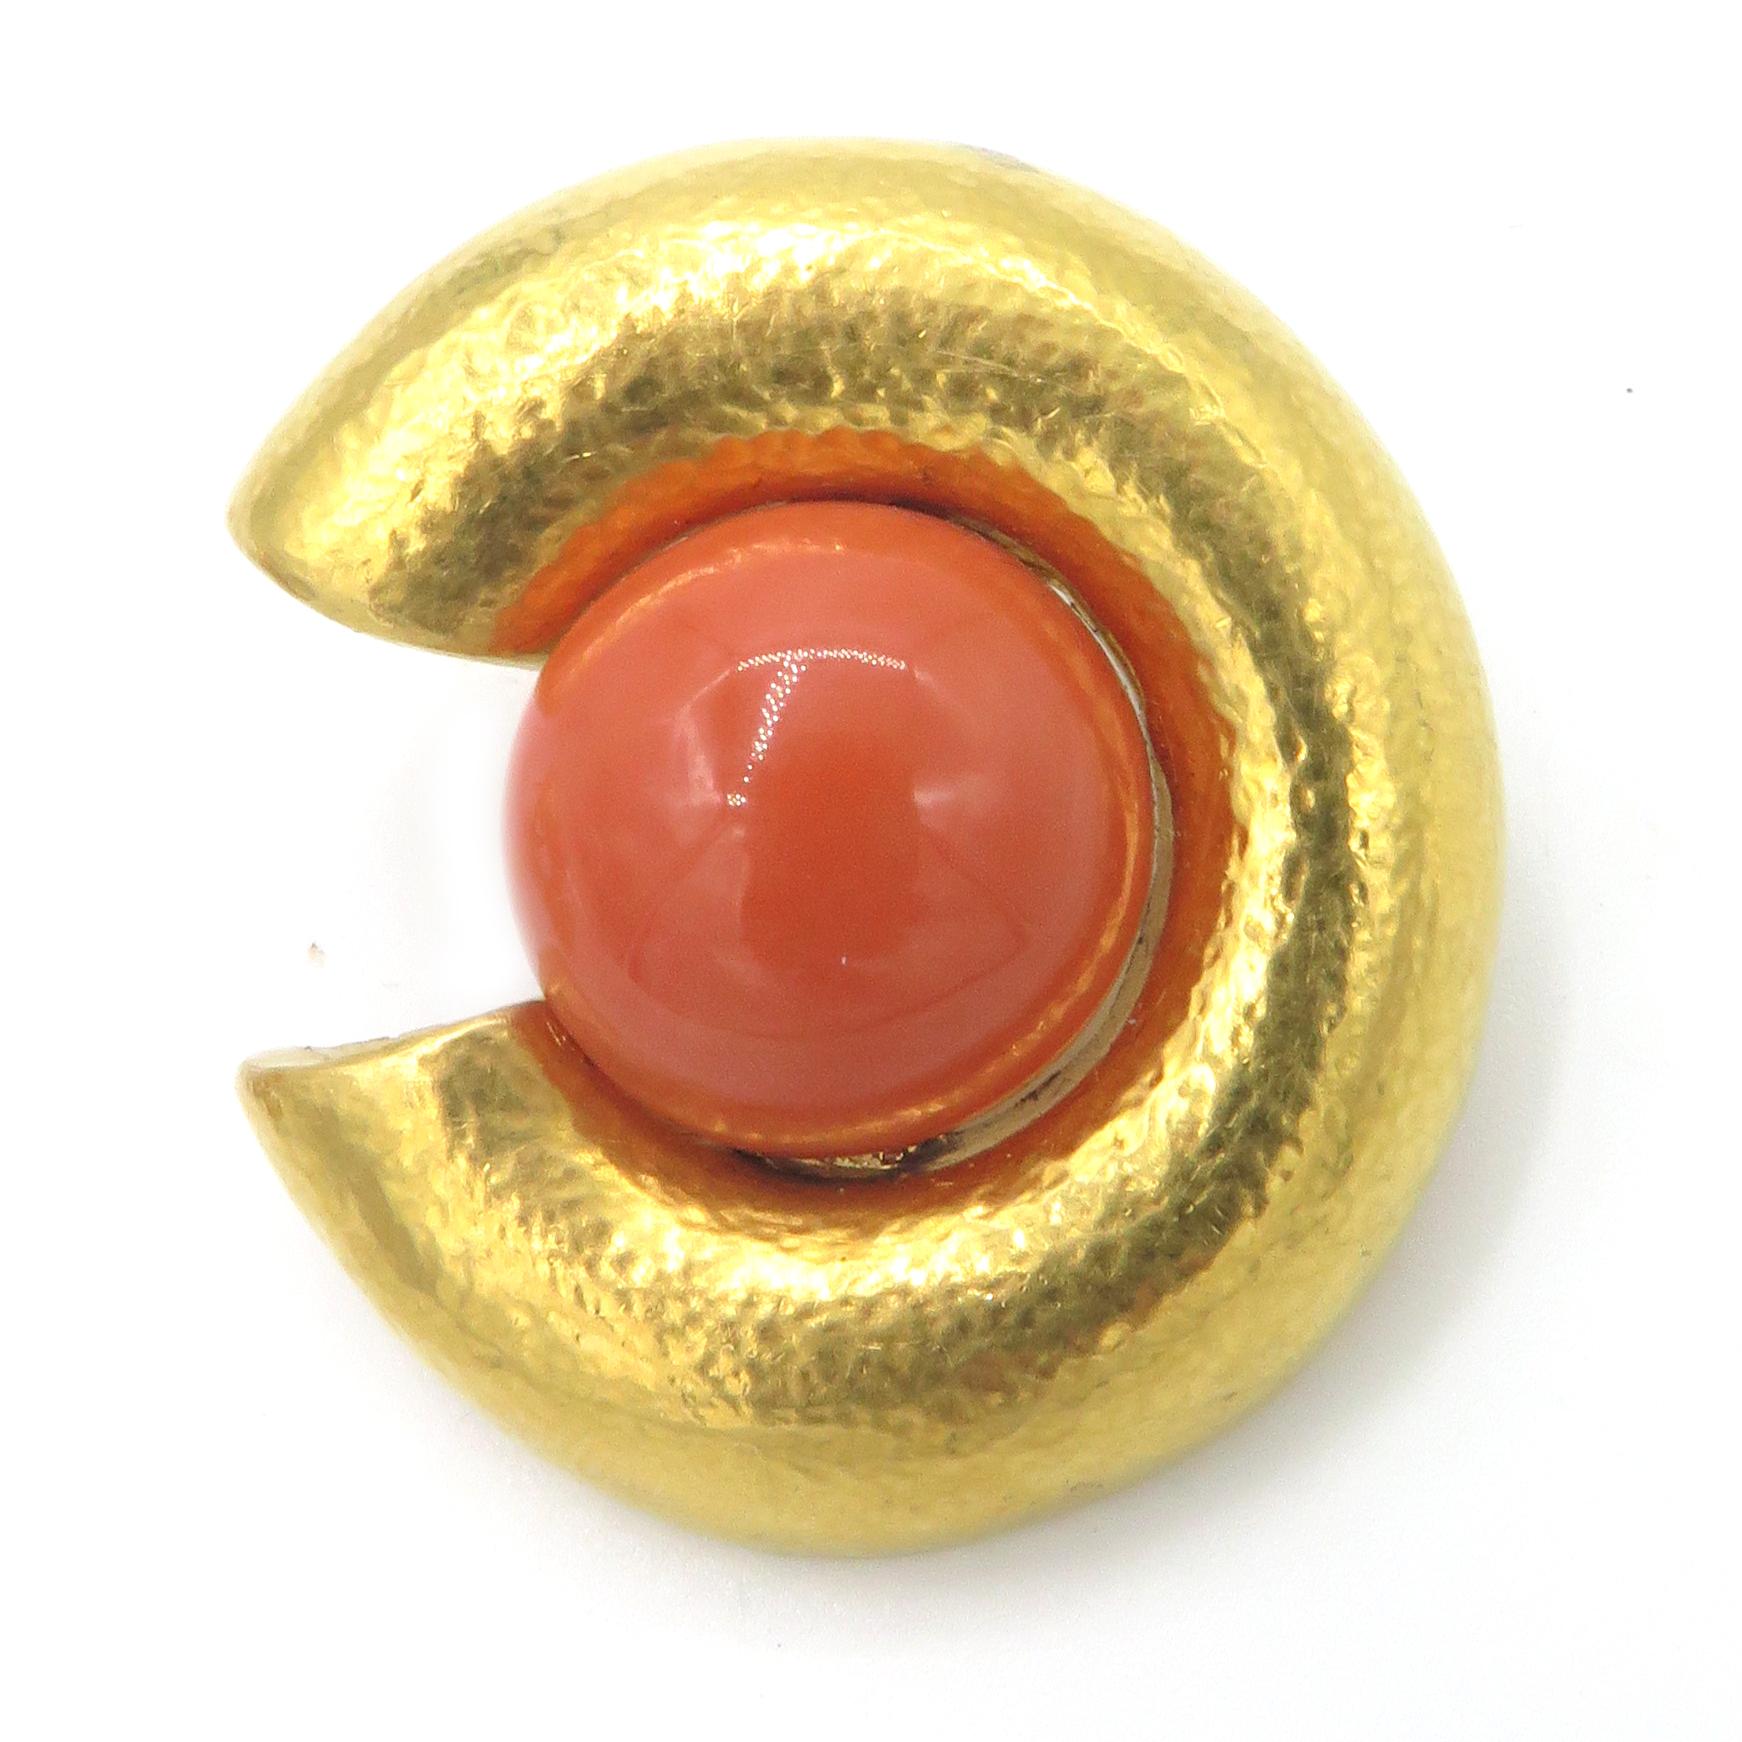 Zolotas was founded in Athens, Greece in 1895. Their timeless designs are a combination of ancient Greek heritage with modern style. These beautiful 24Kt yellow gold earrings with a beautiful round cabochon coral at the center. The, earrings weigh